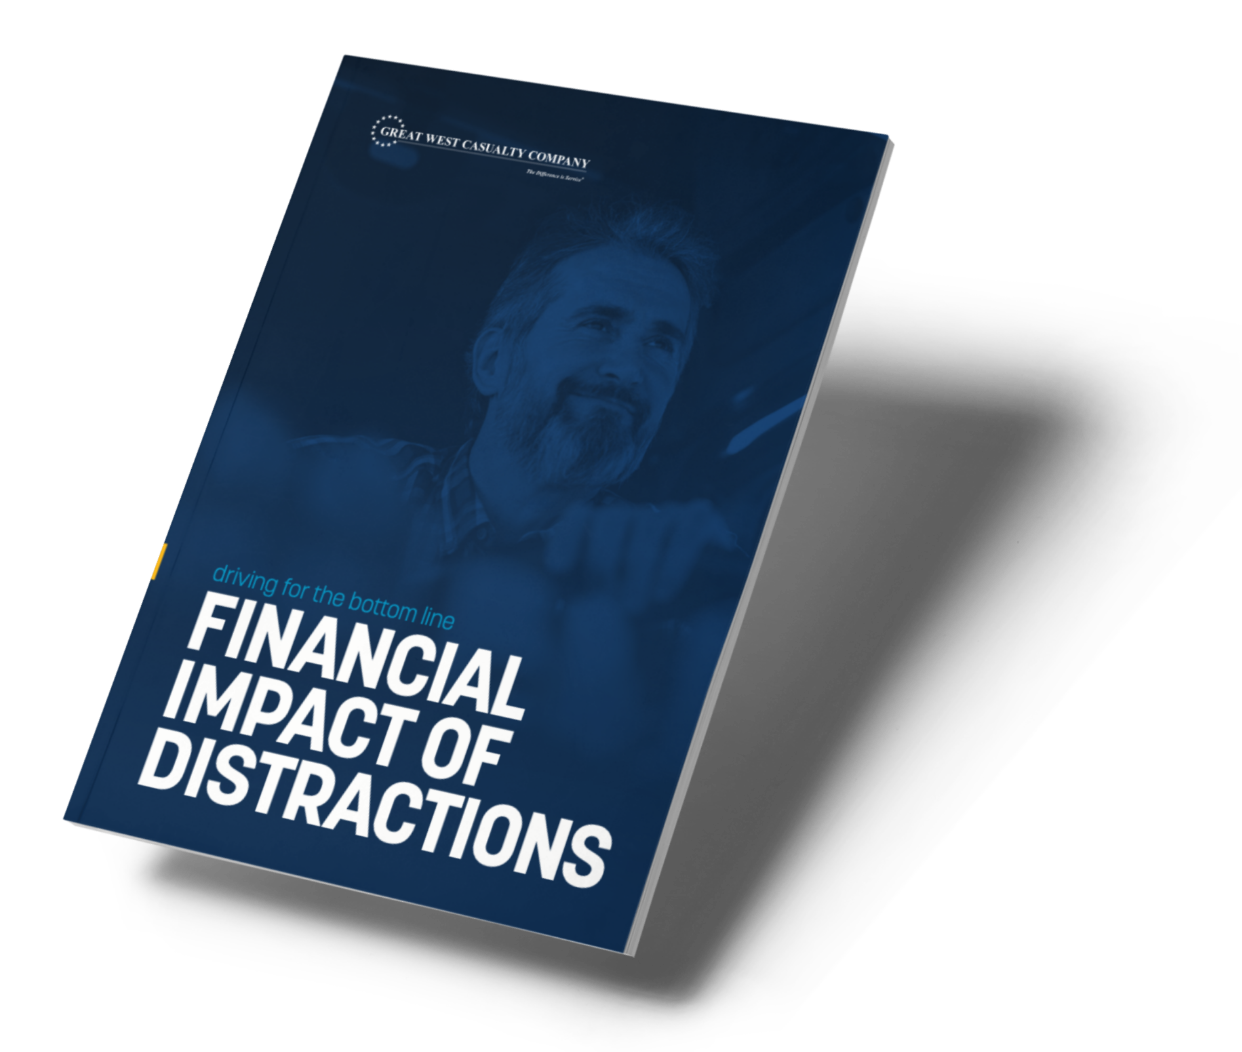 gwcc-5-9-campaign-financial-impact-of-distractions-offer-cover@2x